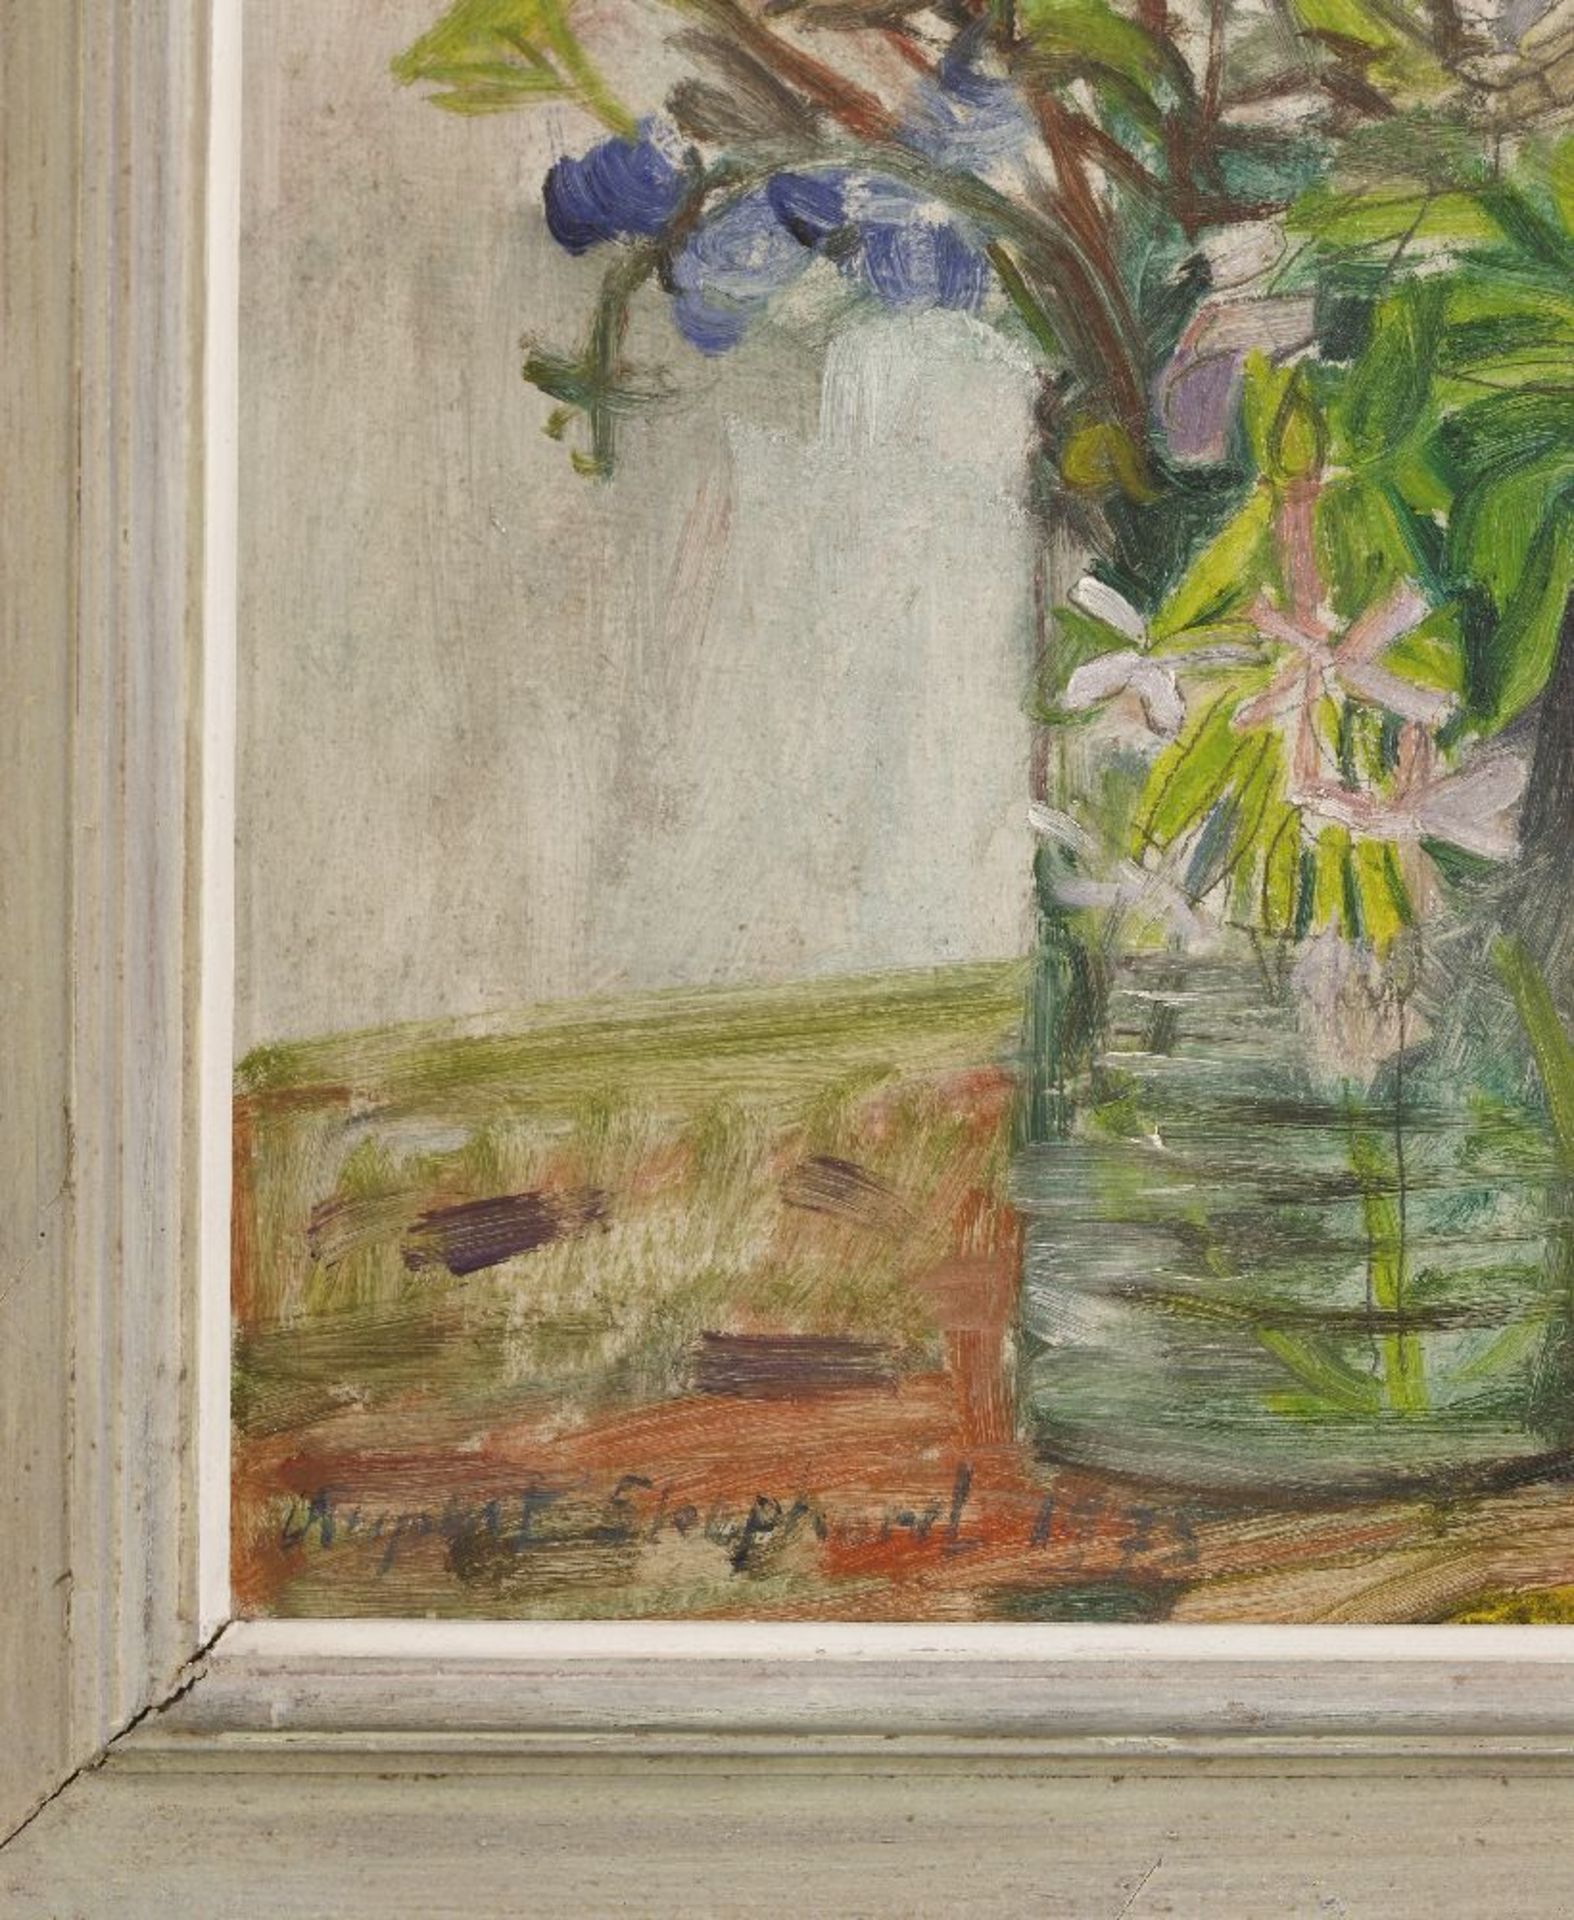 *Rupert Shephard (1909-1992)A VASE OF WILD FLOWERSSigned and dated 1975 l.l., pencil and oil on - Image 4 of 4